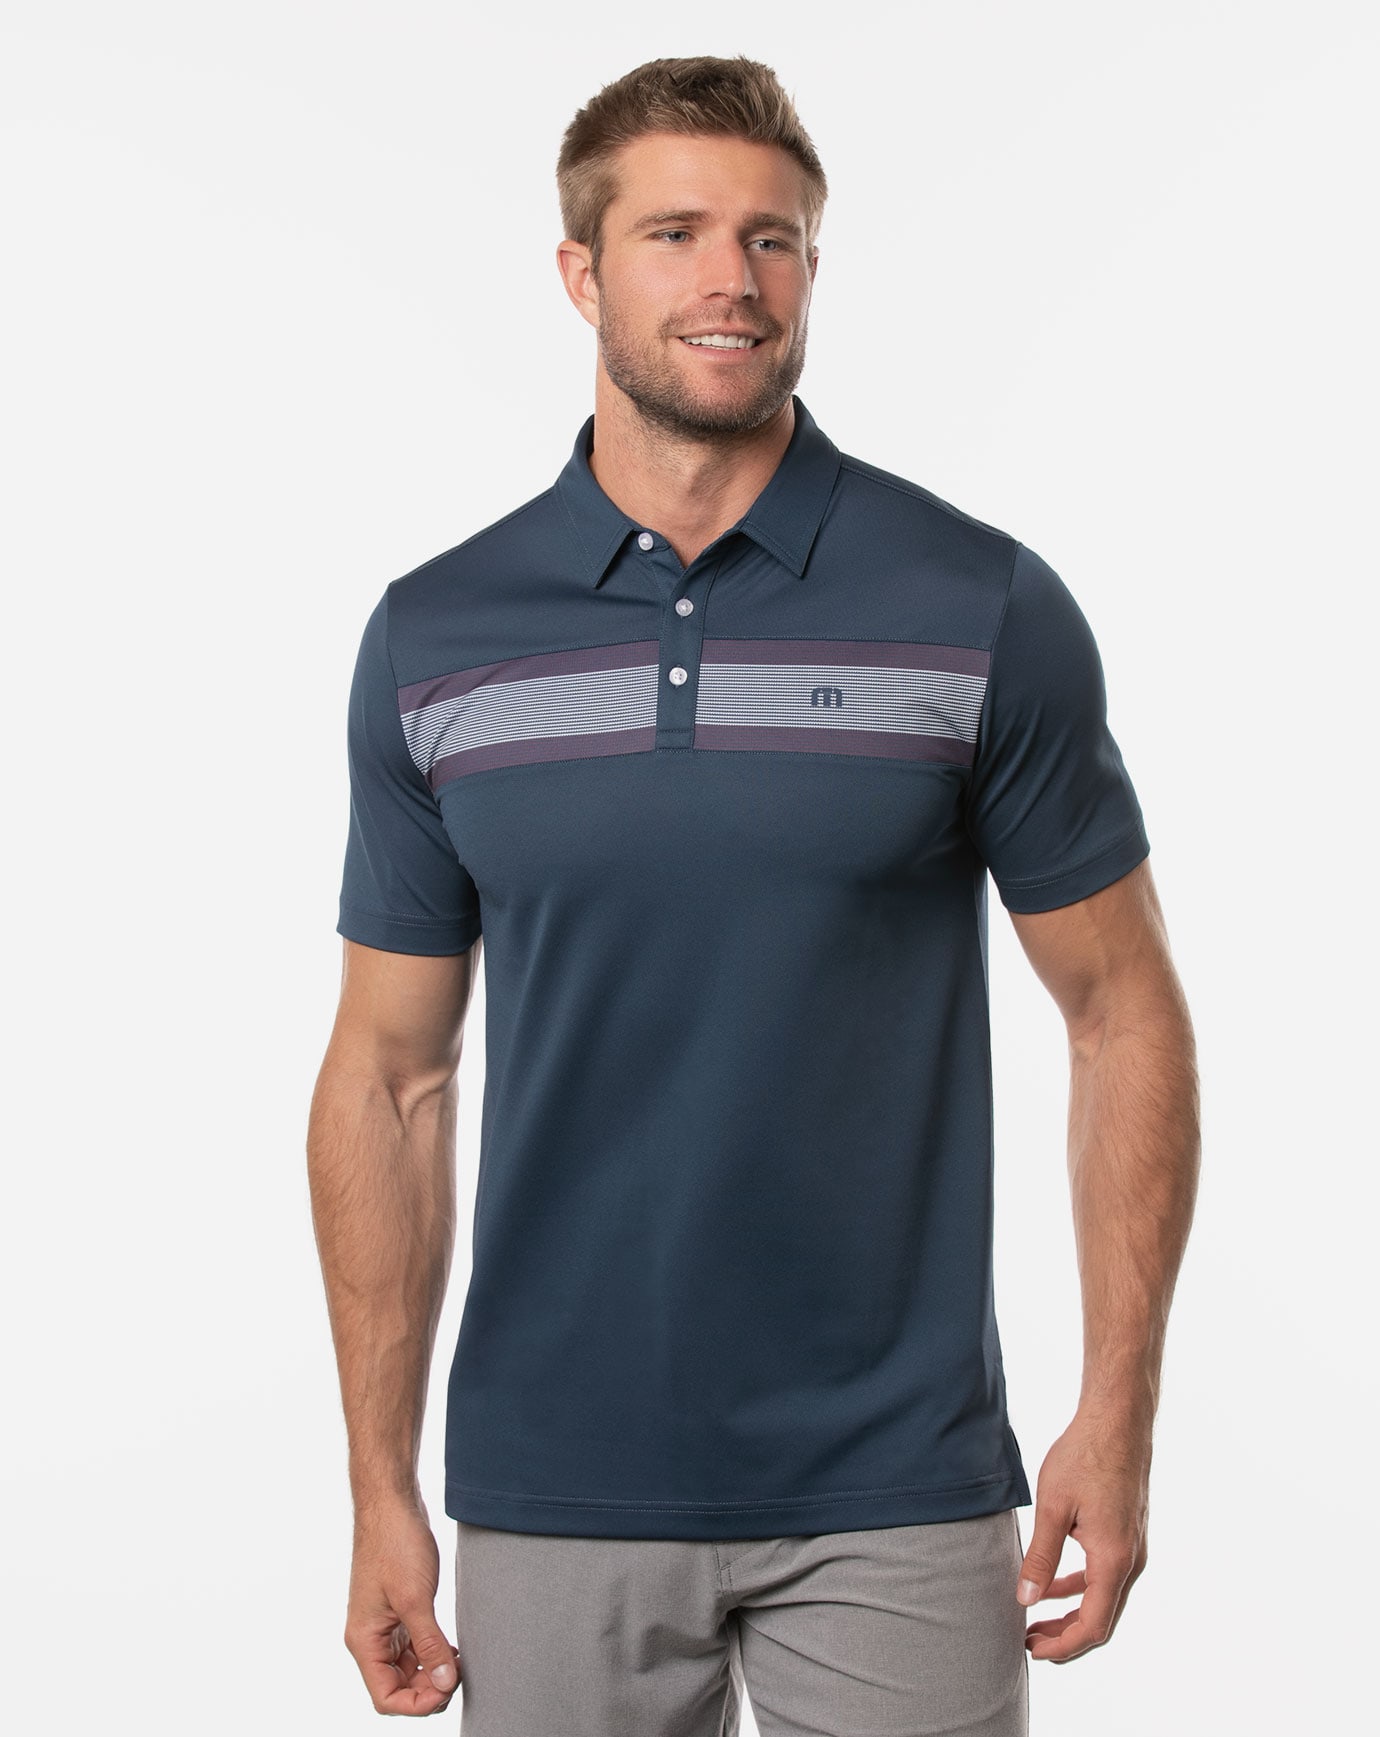 Related Product - LAKE YOU A LOT POLO